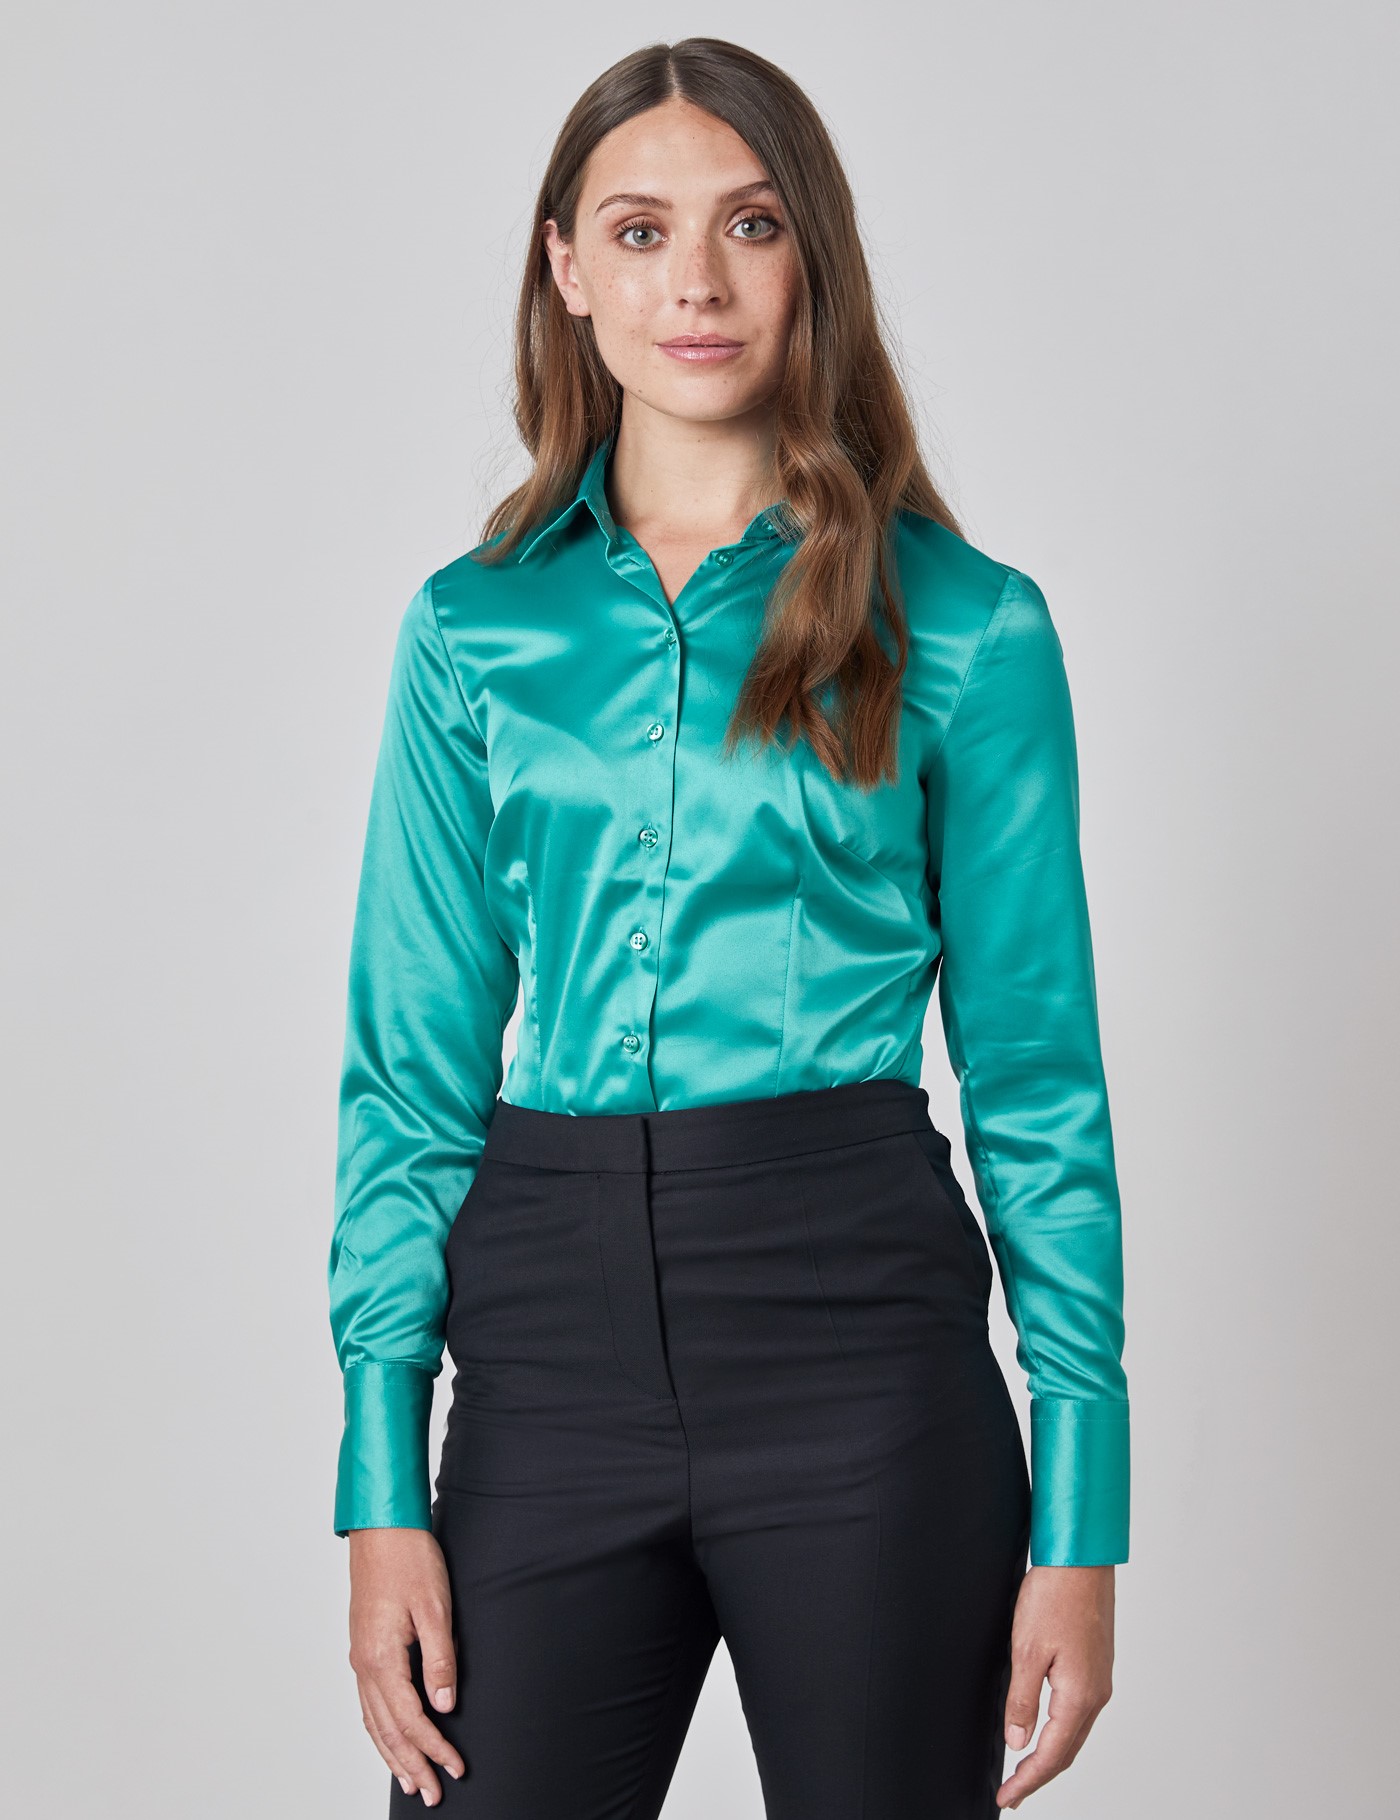 Plain Satin Stretch Women S Fitted Shirt With Single Cuff In Jade Hawes And Curtis Australia